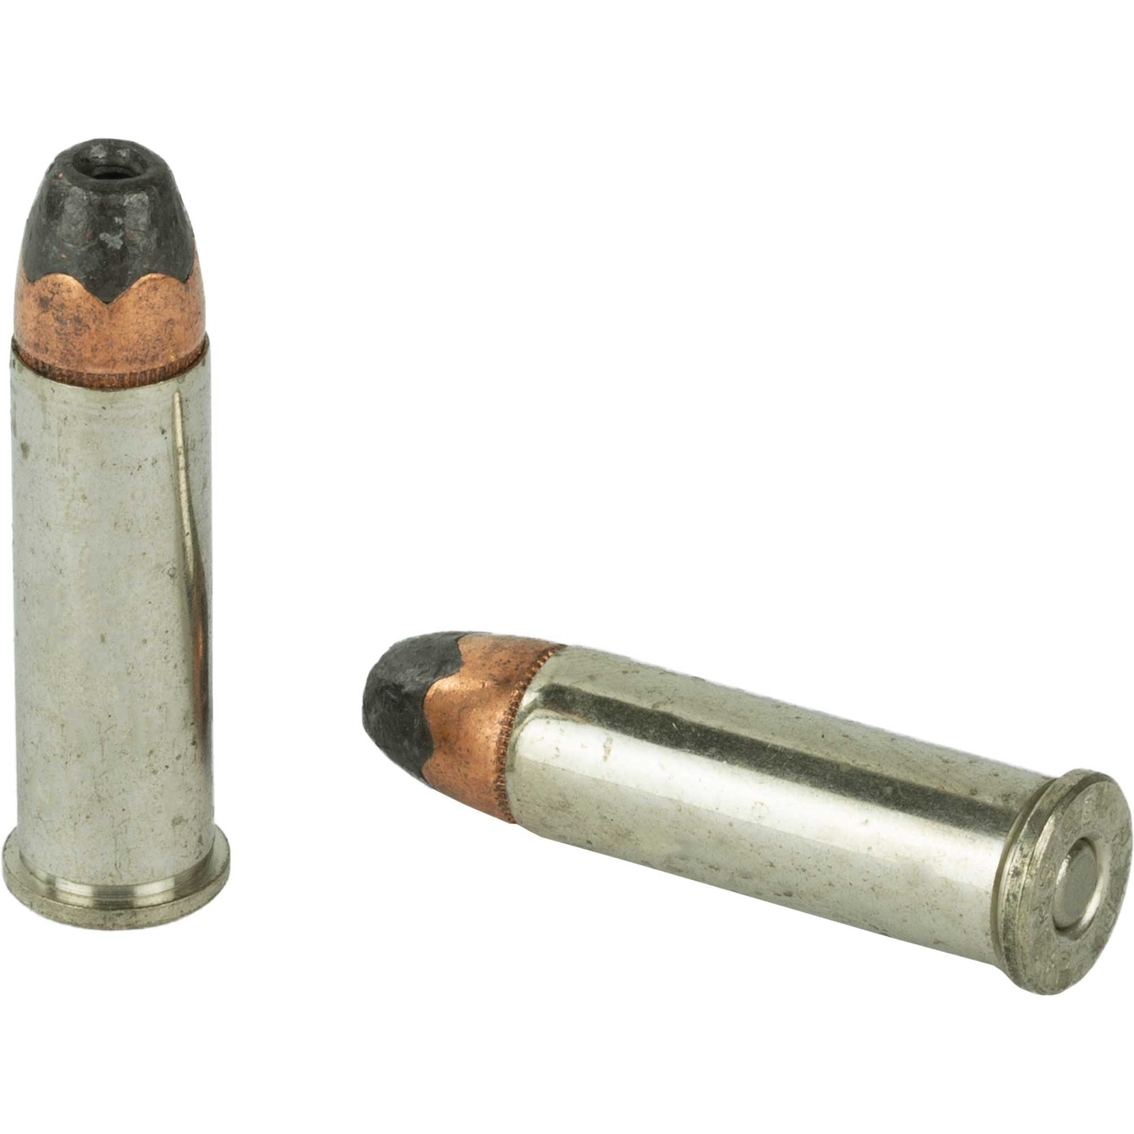 Remington High Terminal Performance .38 Special 125 Gr. Semi-JHP 20 Rounds - Image 3 of 4